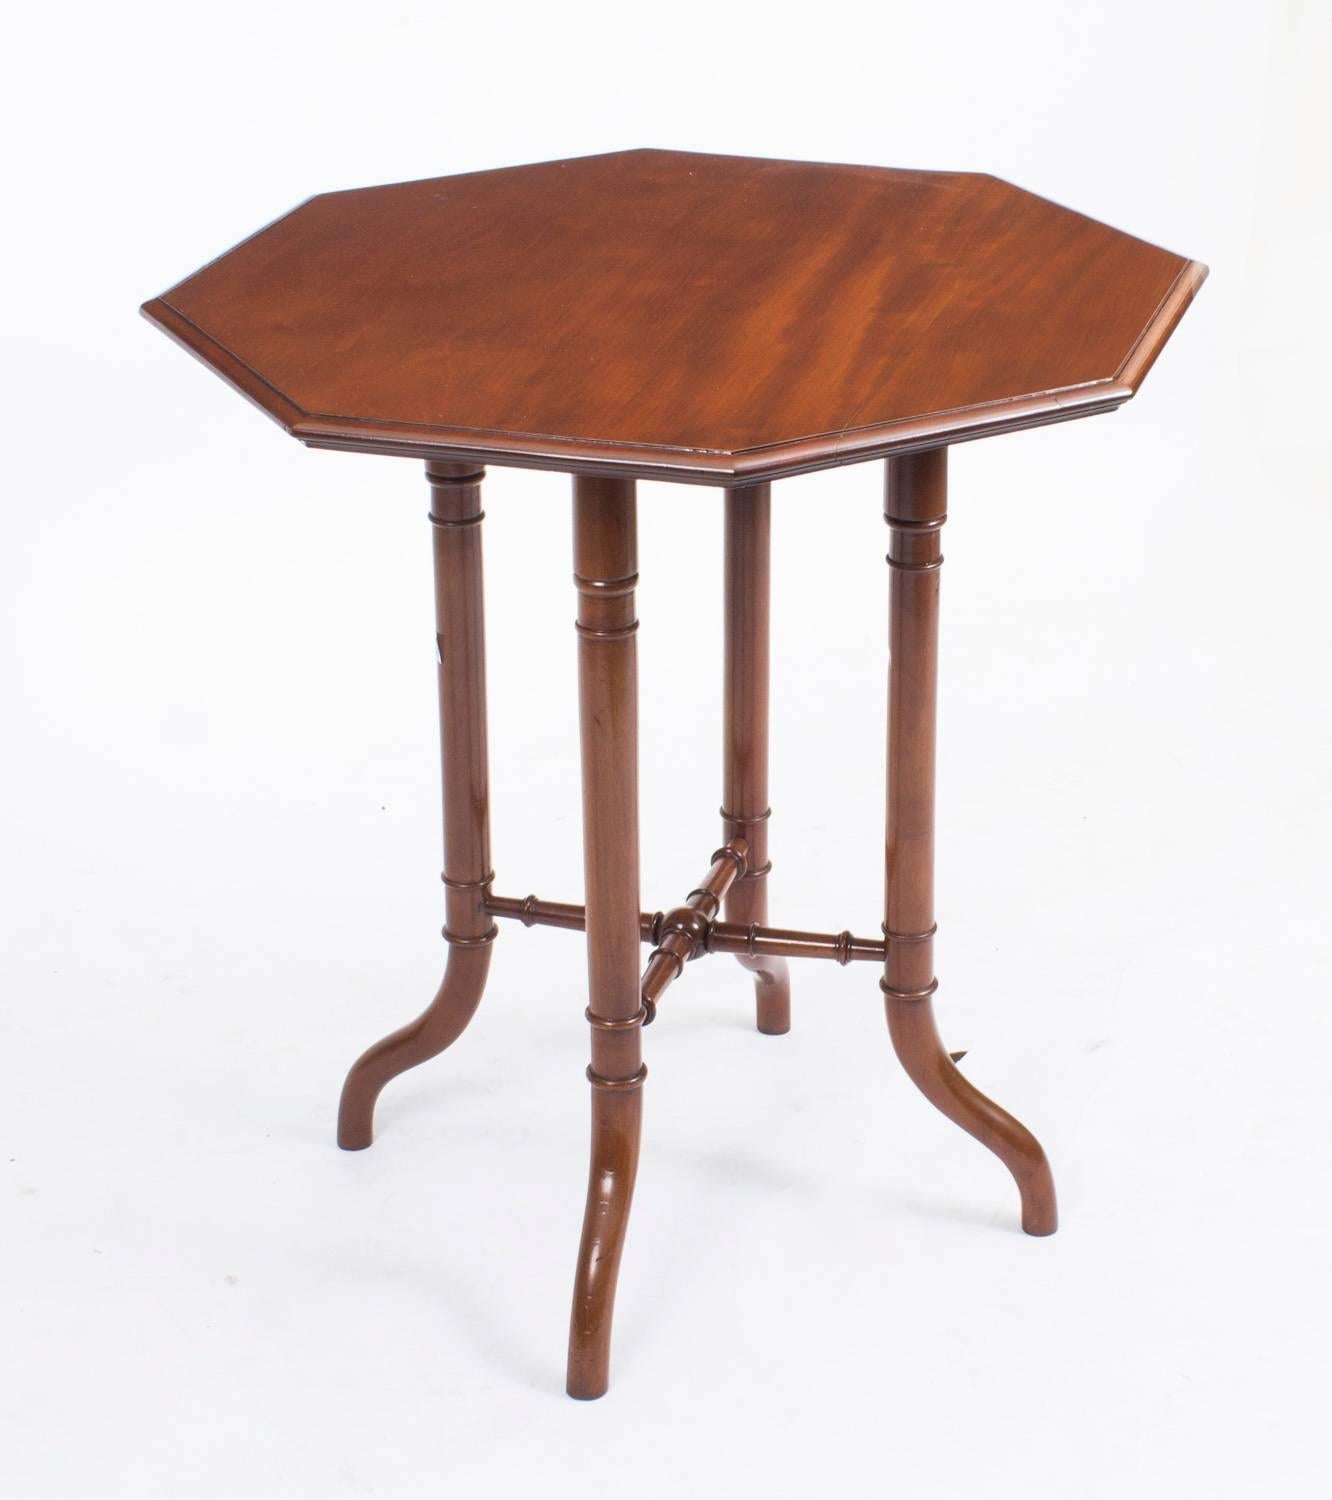 This is a handsome antique Victorian octagonal occasional table, circa 1860 in date.

This octagonal table has been masterfully crafted in solid mahogany.

There is no mistaking the unique quality and elaborate design, which is certain to make